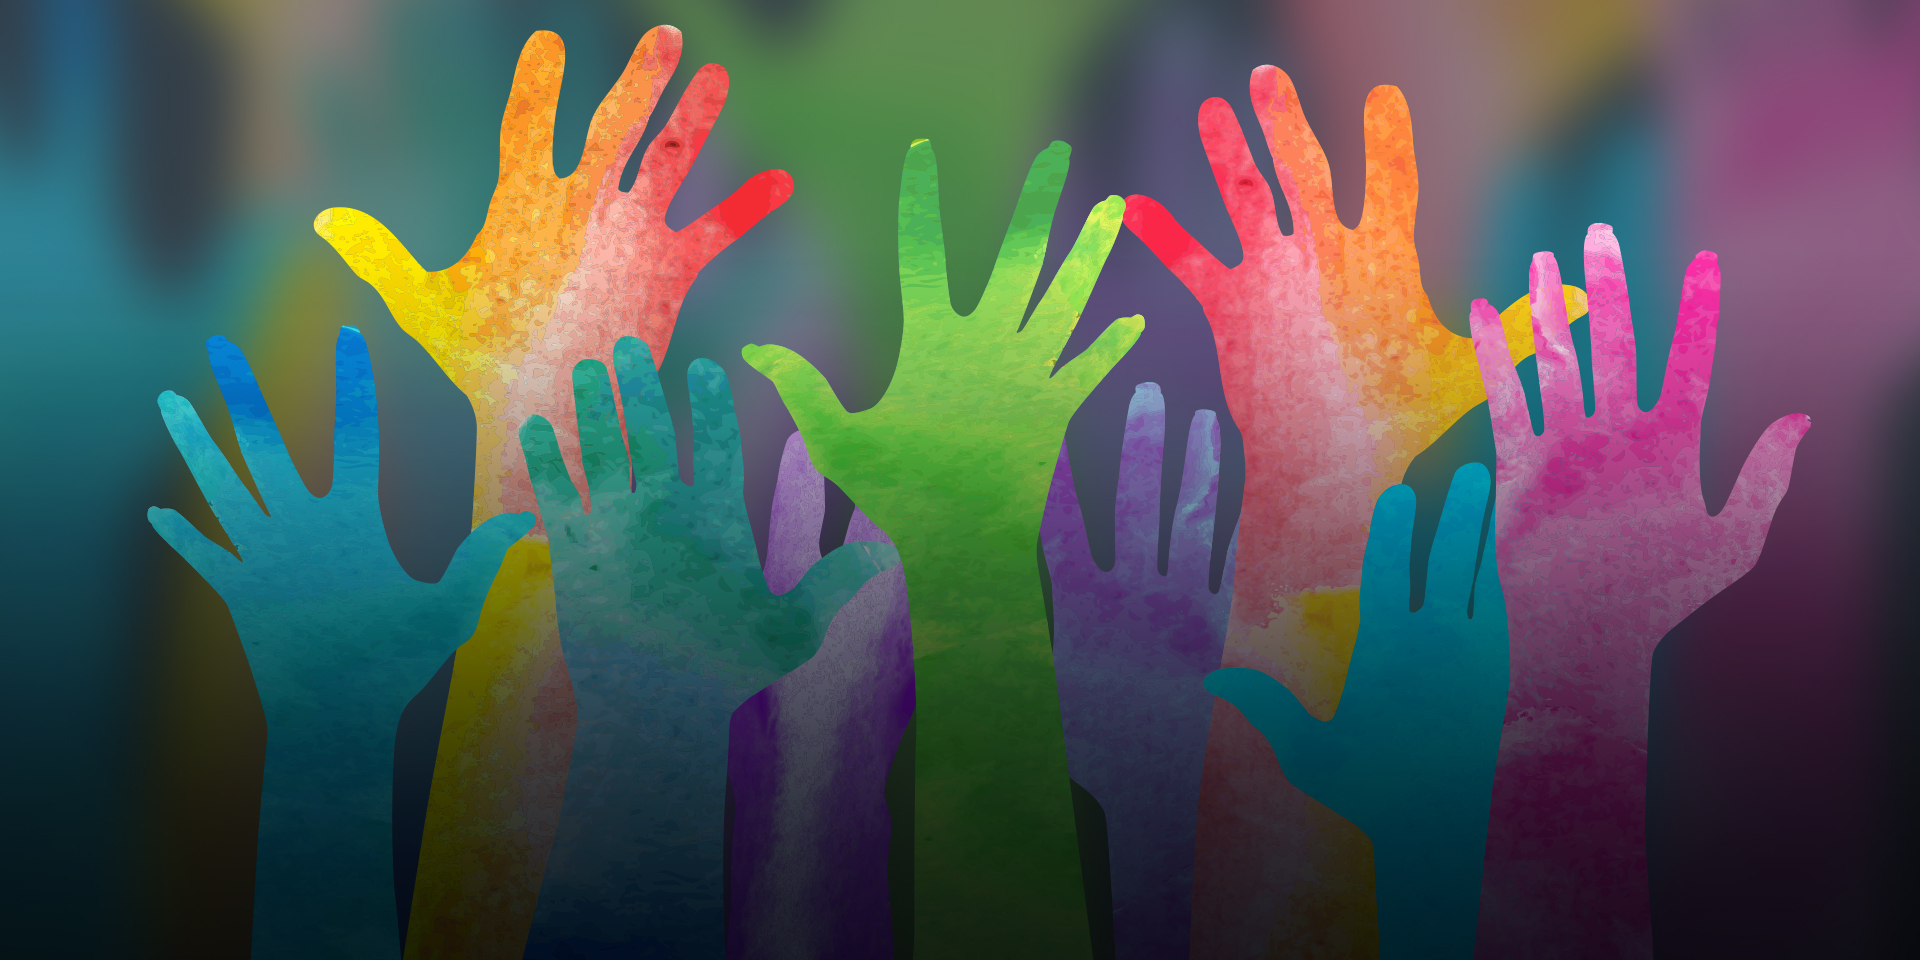 A graphic showing several raised hands in different colors ranging from blue to violet.